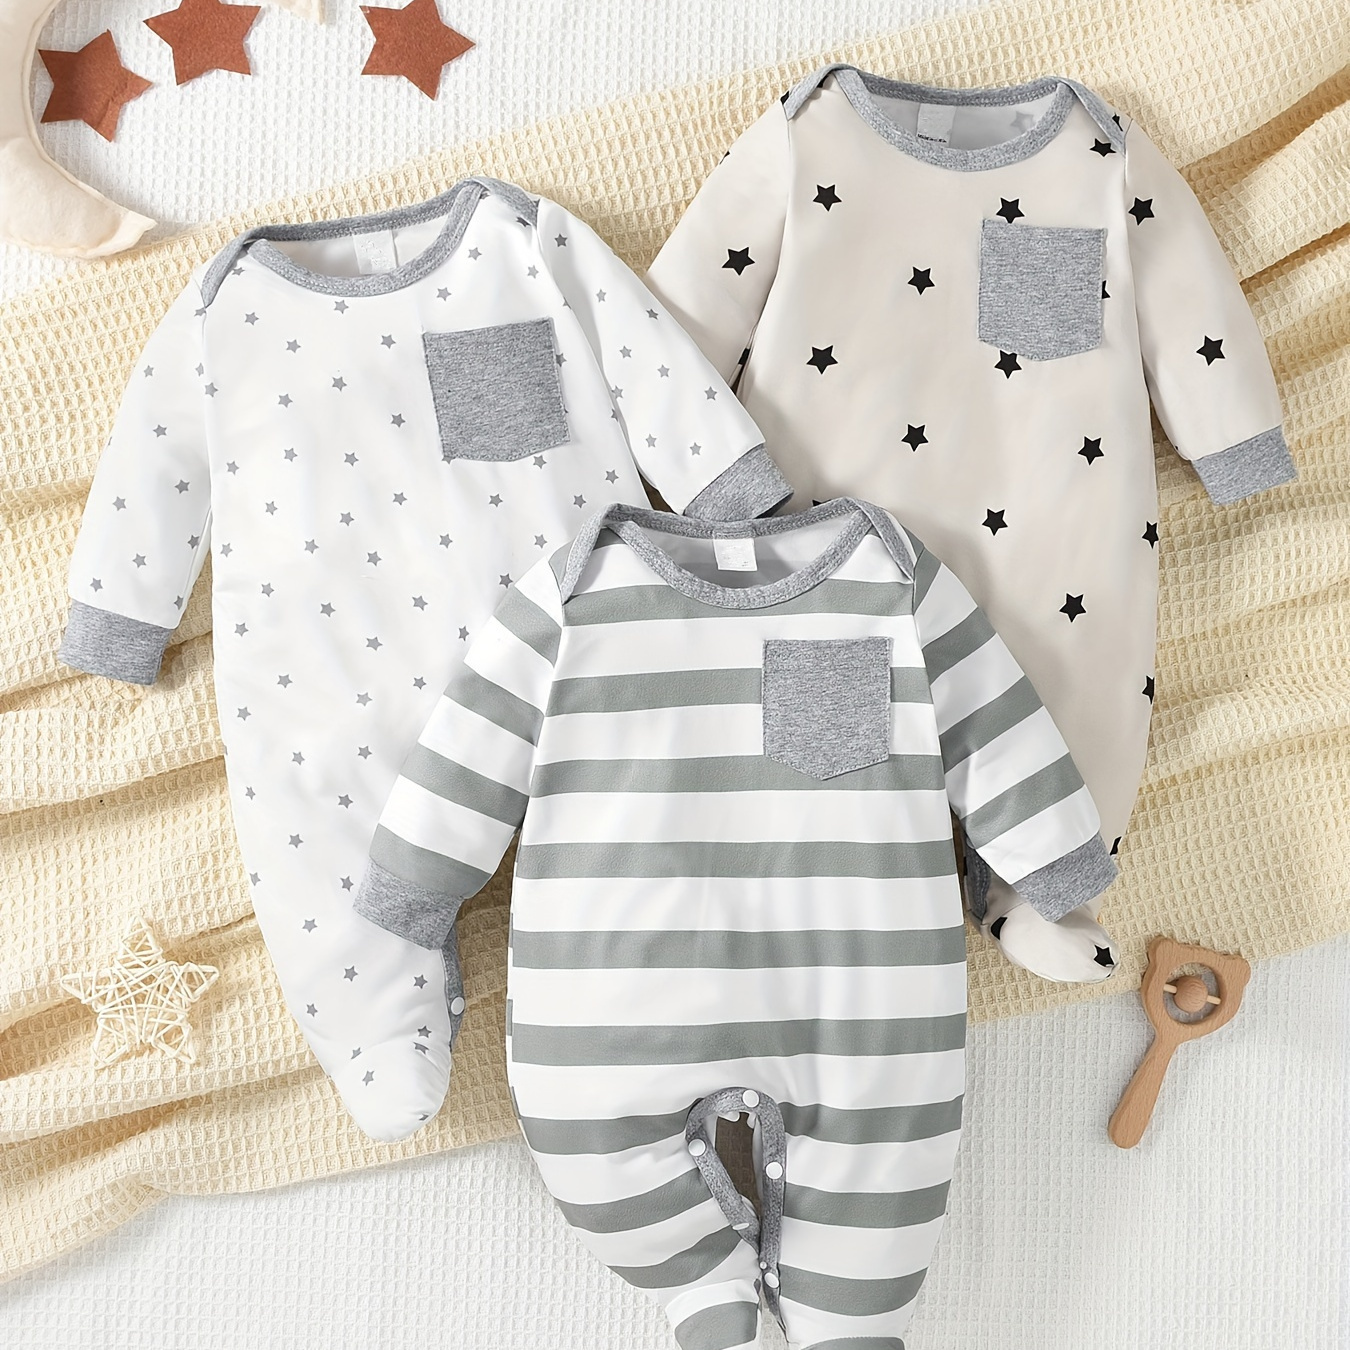 

3-pack Newborn Unisex Footed Onesie Rompers Set, Casual Style, Pattern, Comfortable Baby Pajamas, Snap Closure - Grey/white/beige